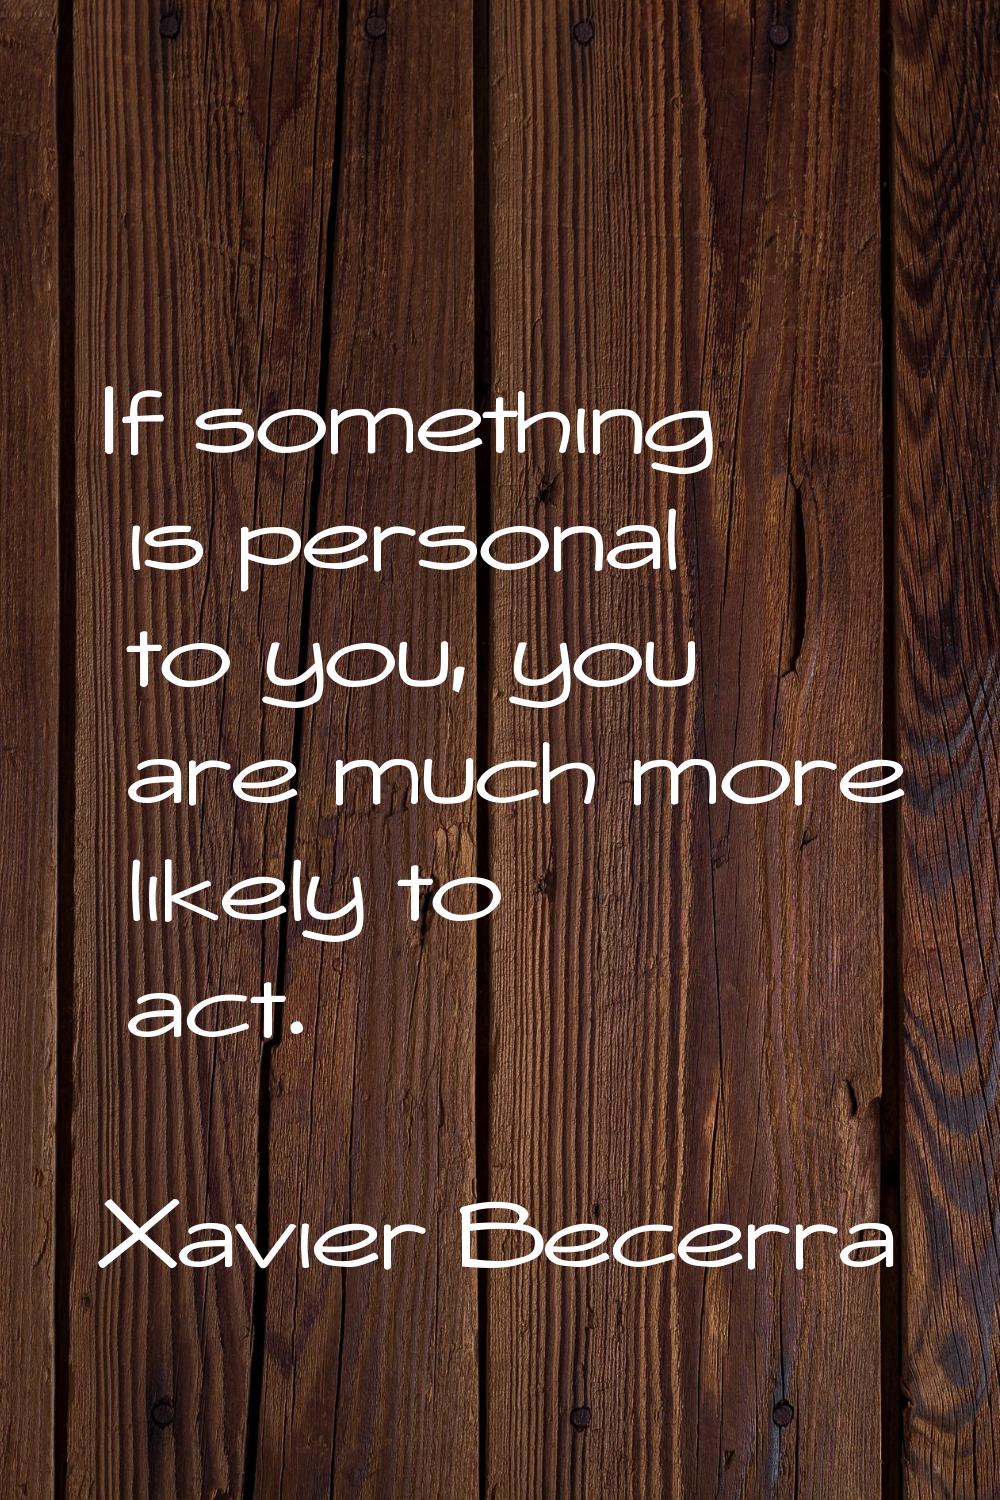 If something is personal to you, you are much more likely to act.